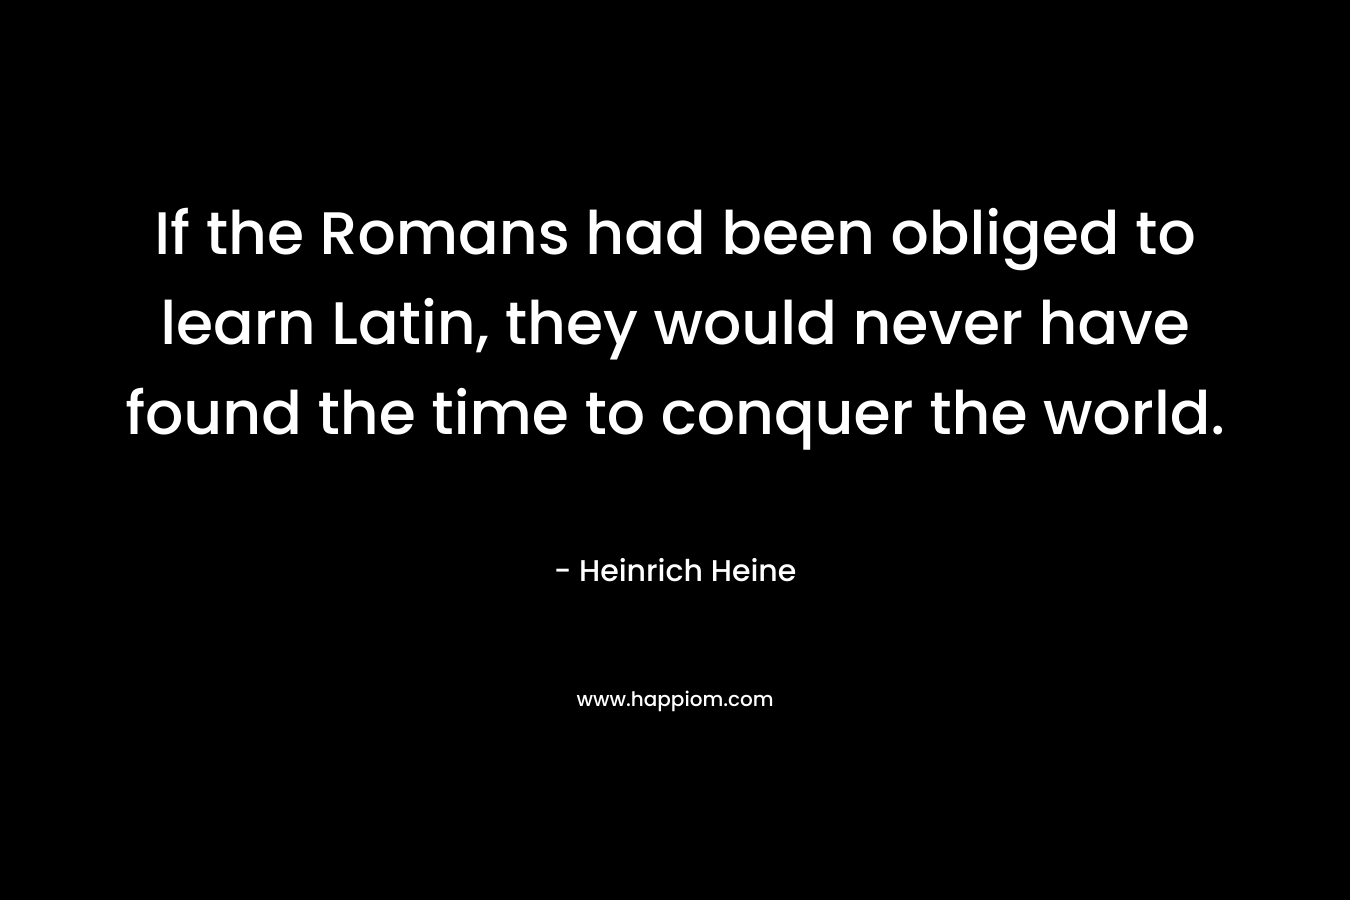 If the Romans had been obliged to learn Latin, they would never have found the time to conquer the world. – Heinrich Heine